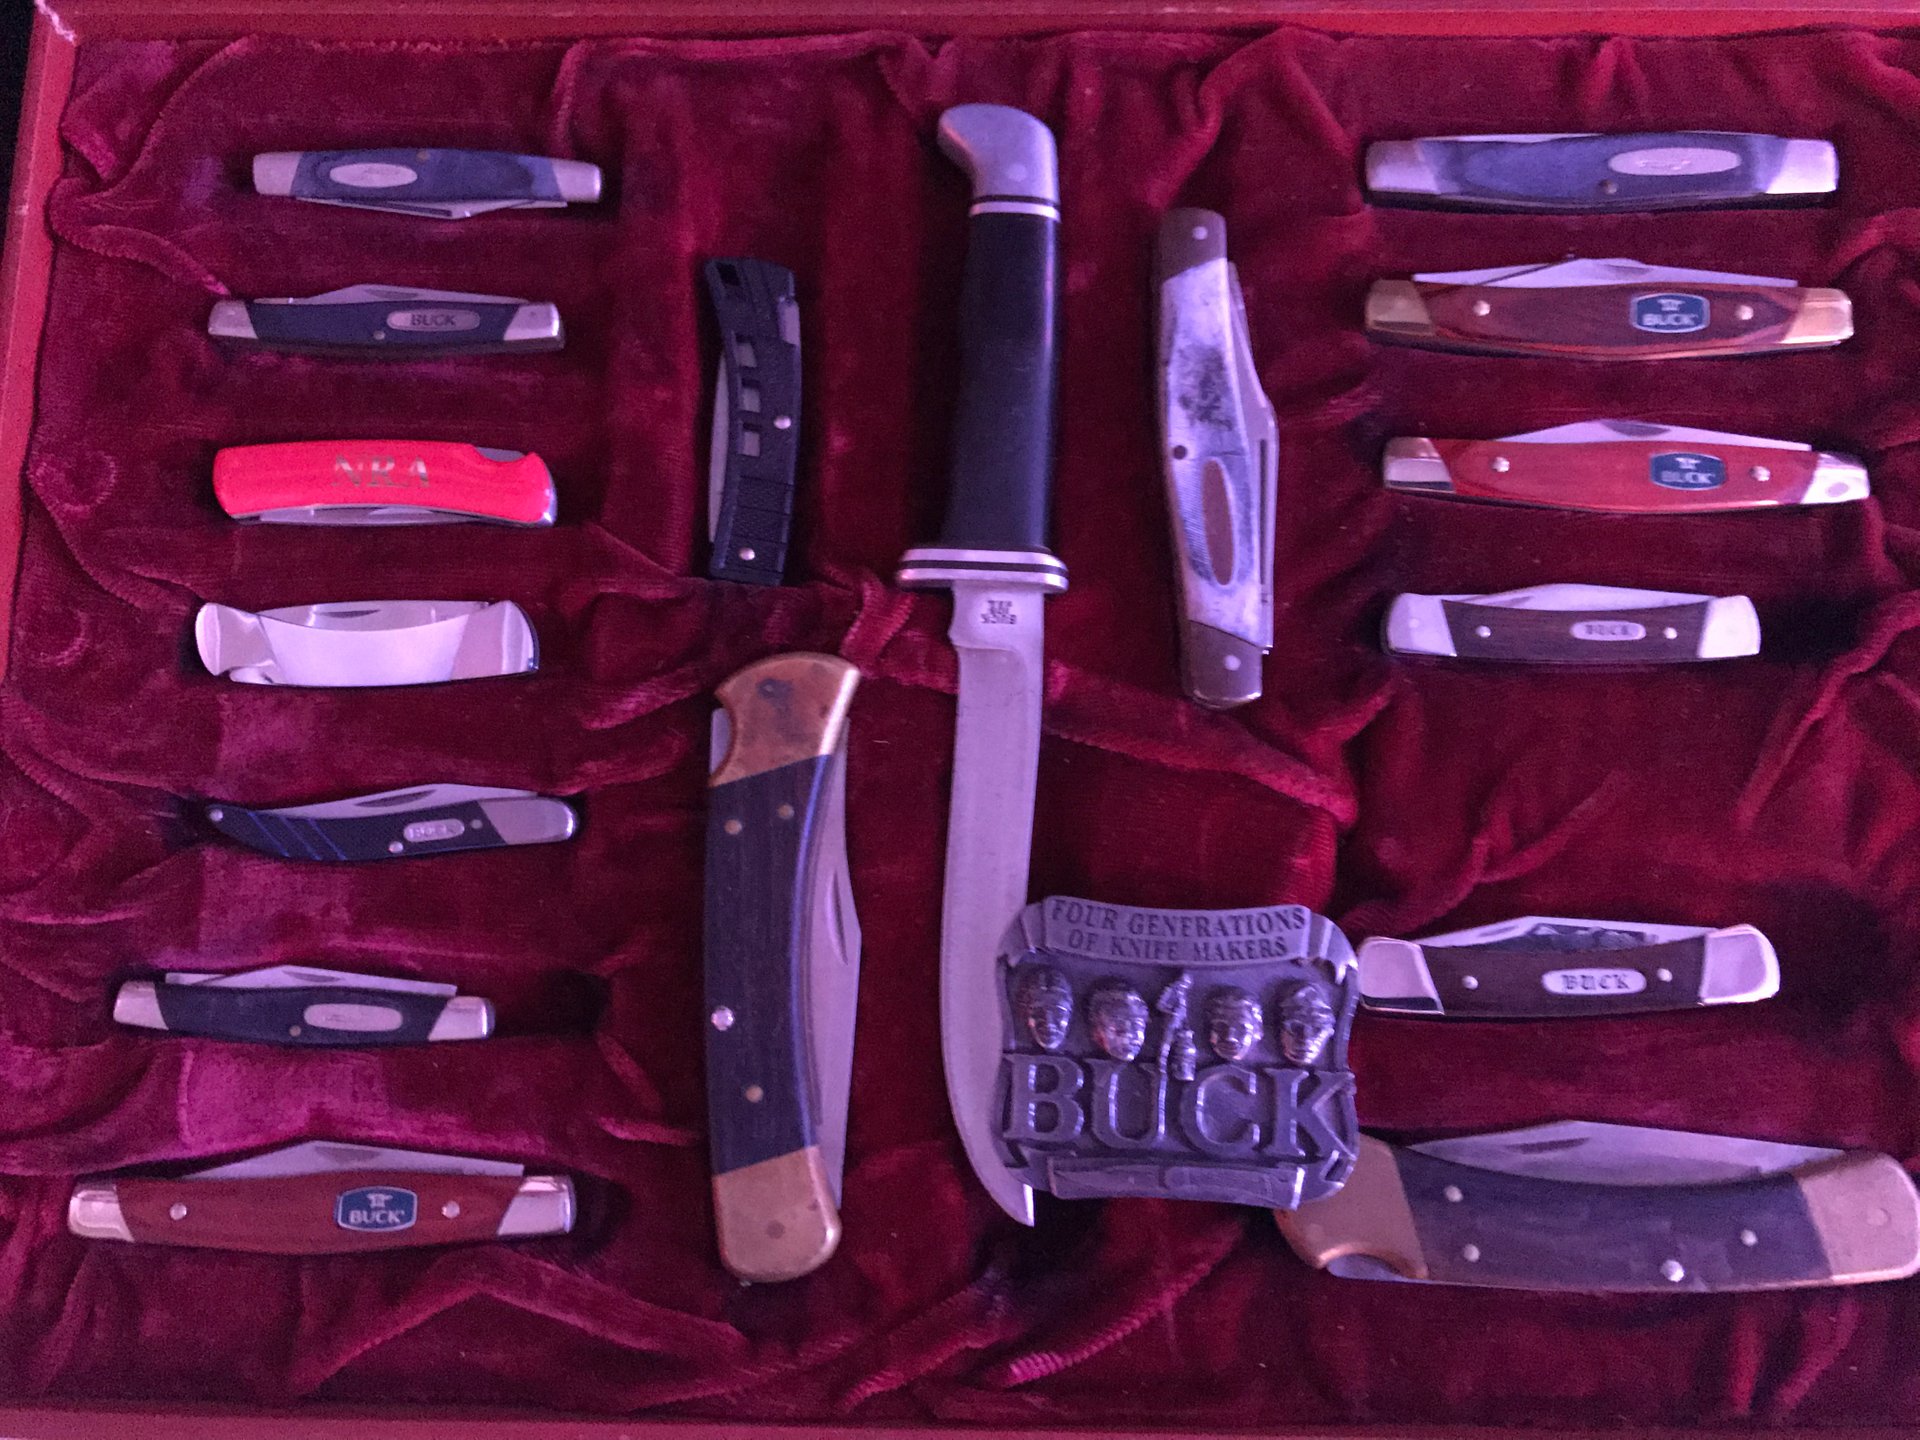 Buck knife collection with super nice display case.